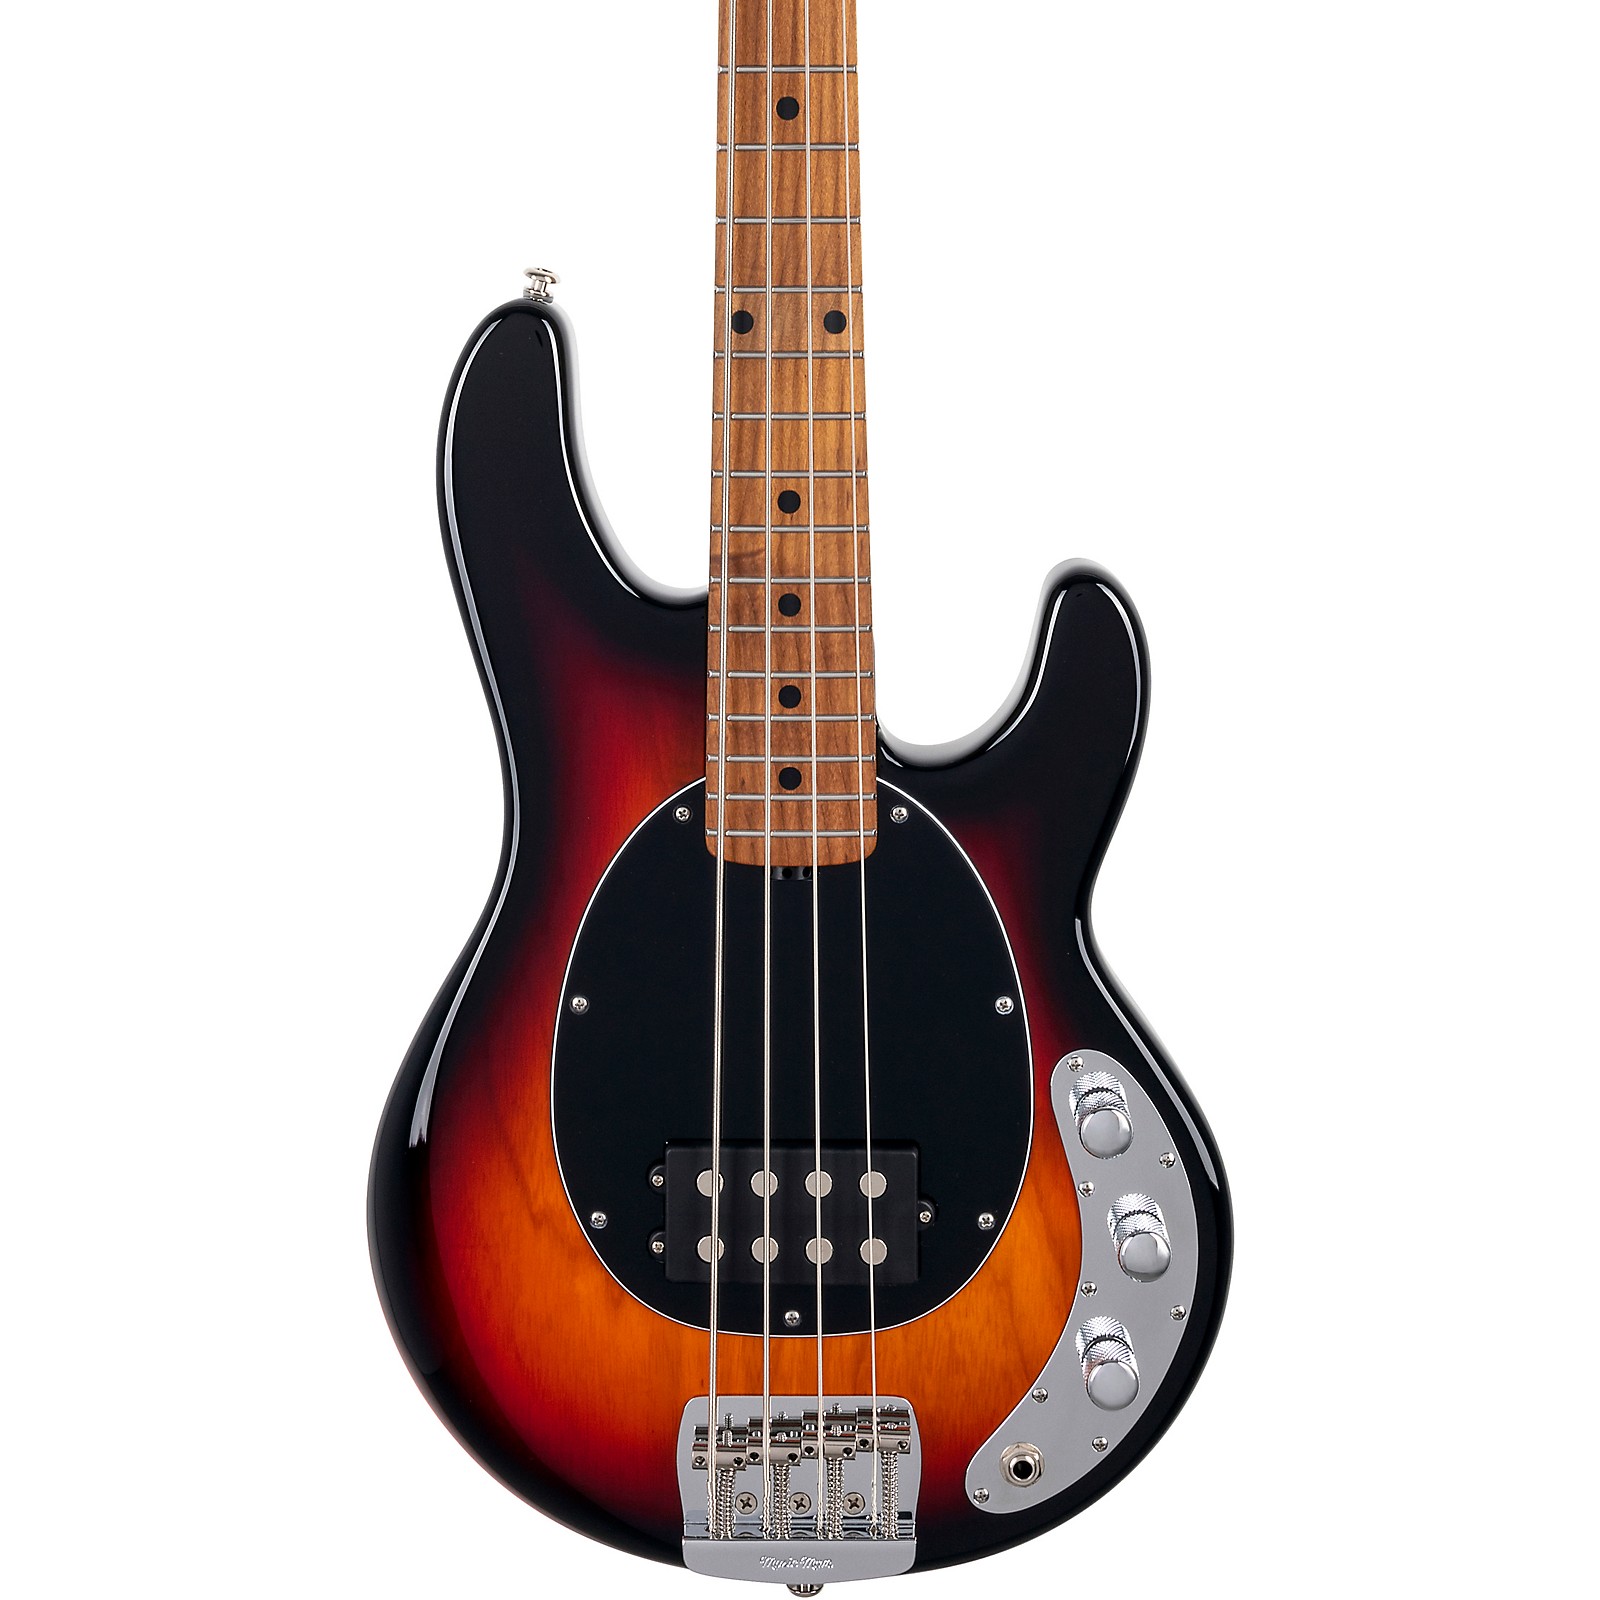 Ernie Ball Music Man Short-Scale StingRay Bass Roasted Maple Neck and Fingerboard Vintage